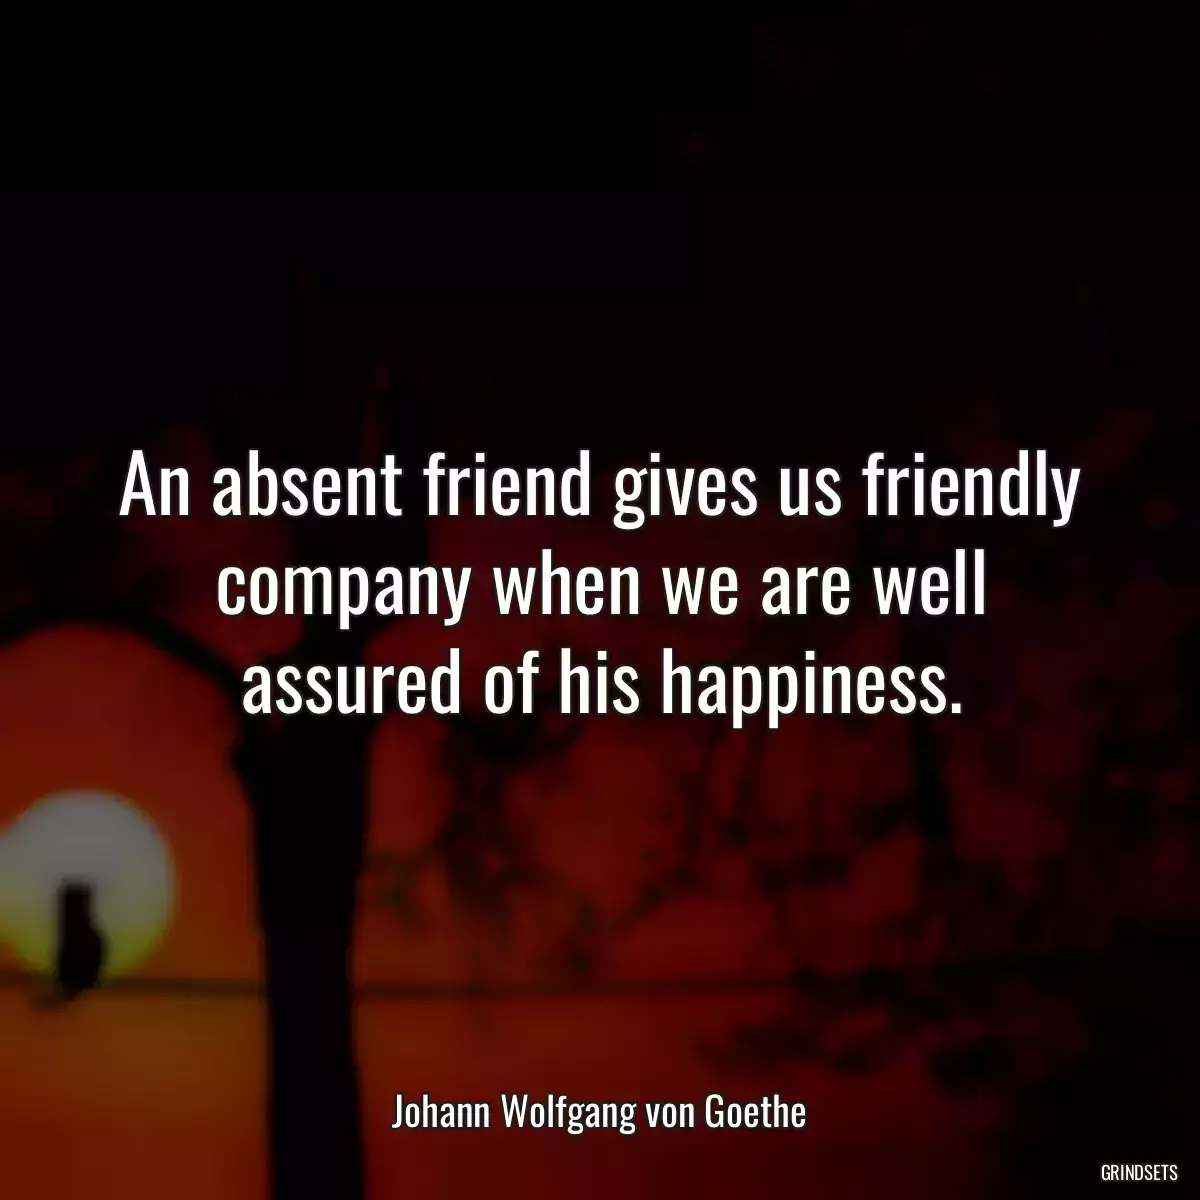 An absent friend gives us friendly company when we are well assured of his happiness.